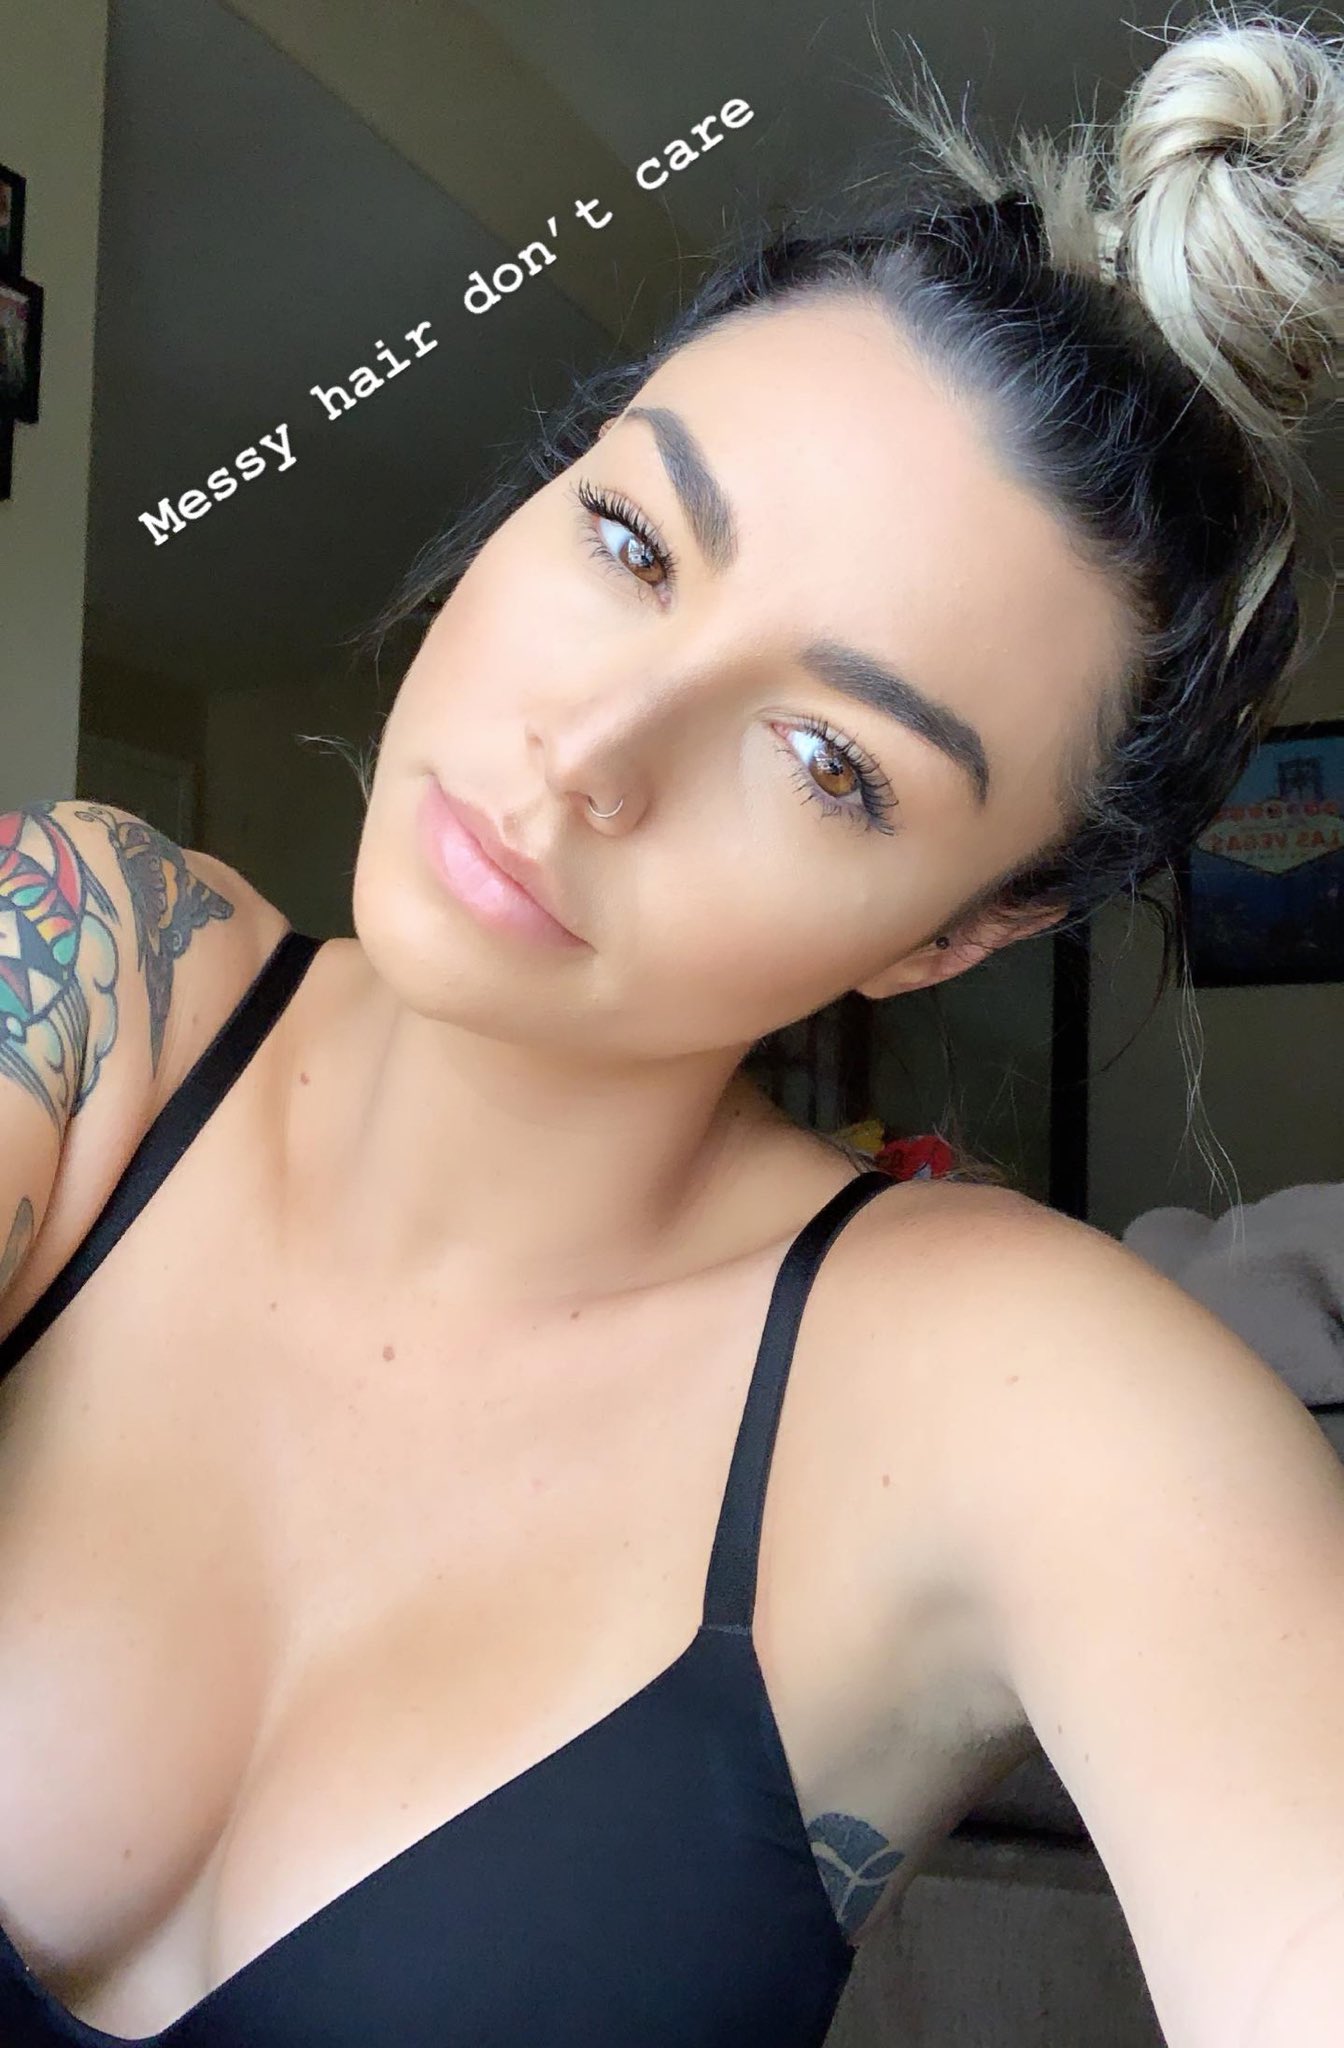 Kailah Casillas - posted in the ChallengePics community